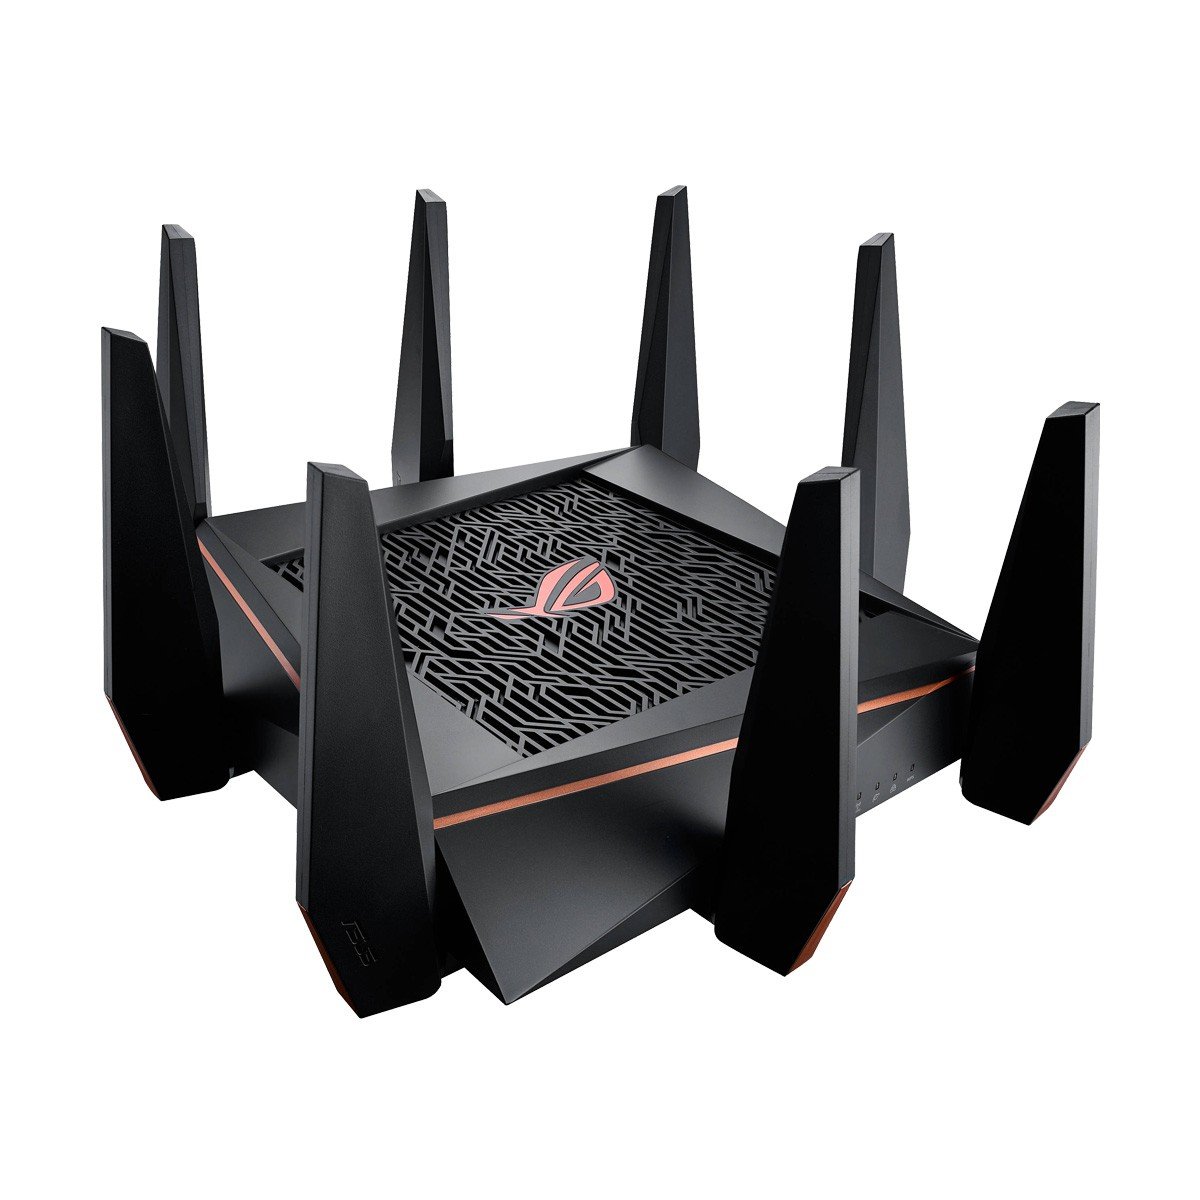 Asus ROG Rapture GTAC5300 (3G/4G) AC5300 Triband WiFi Gaming router